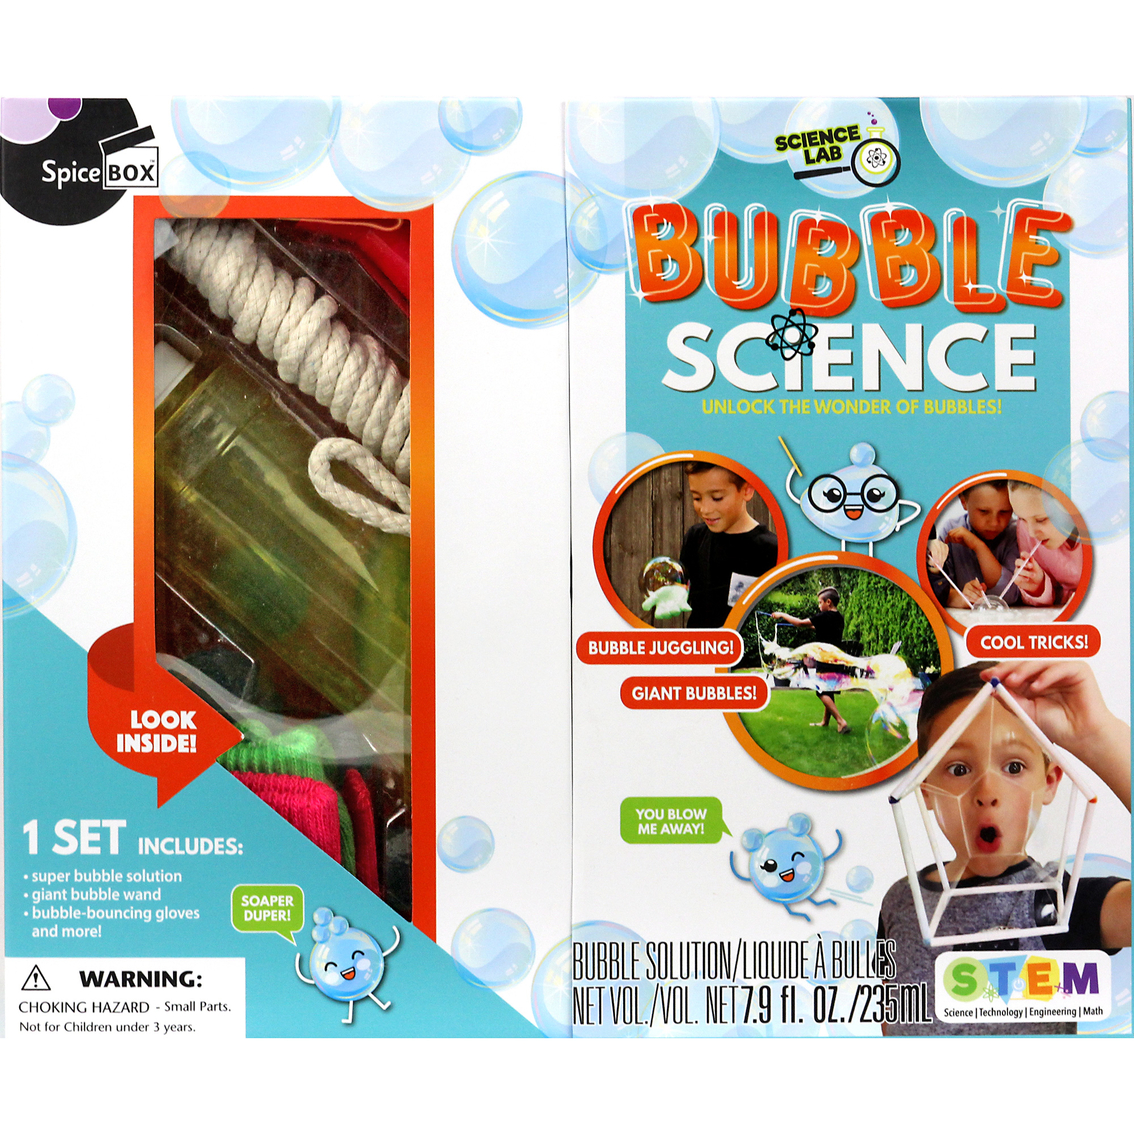 Spice Box Science Lab Bubble Science Kit